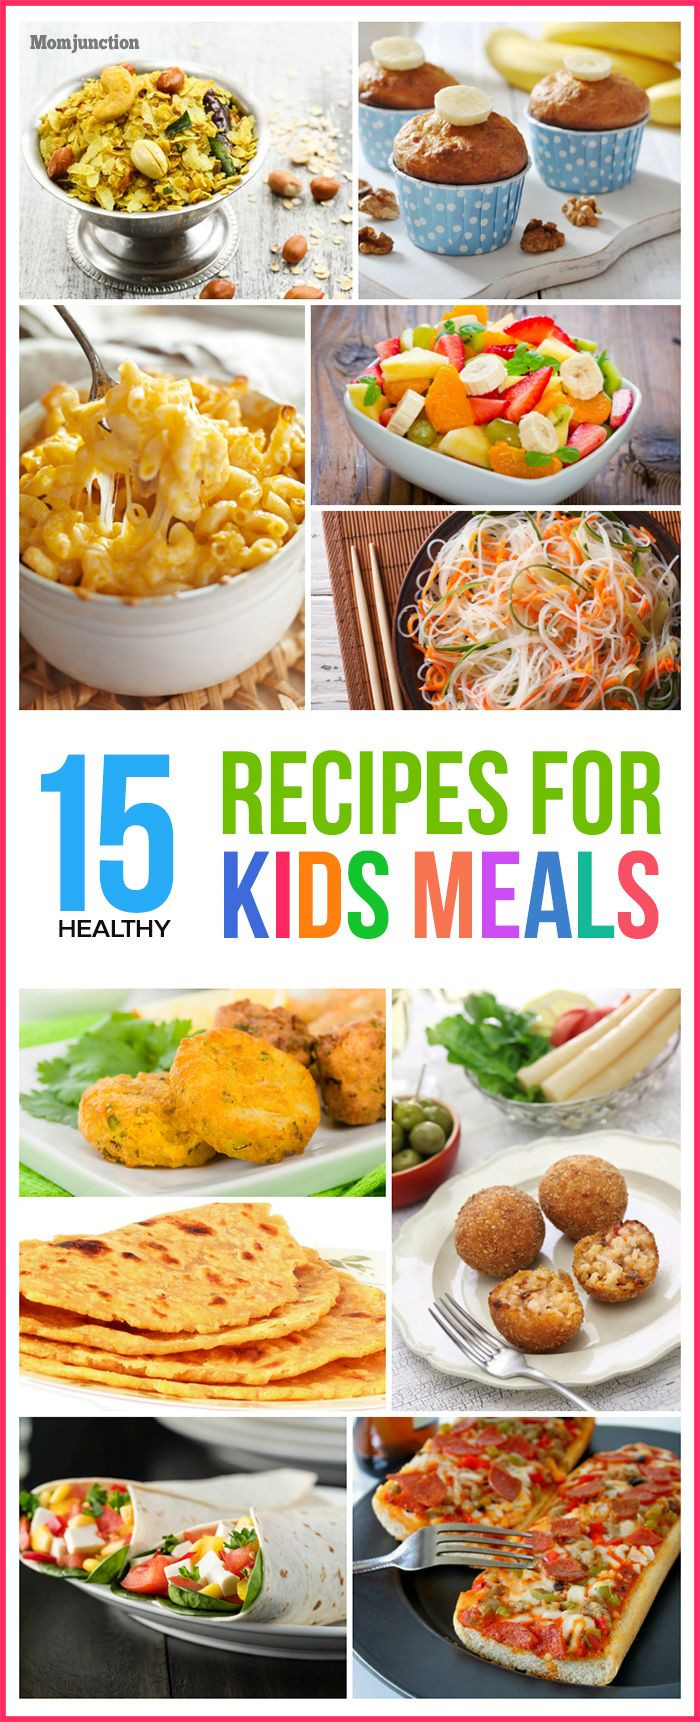 Kid Friendly Meals For Dinner
 Top 15 Healthy Recipes For Kids Meals